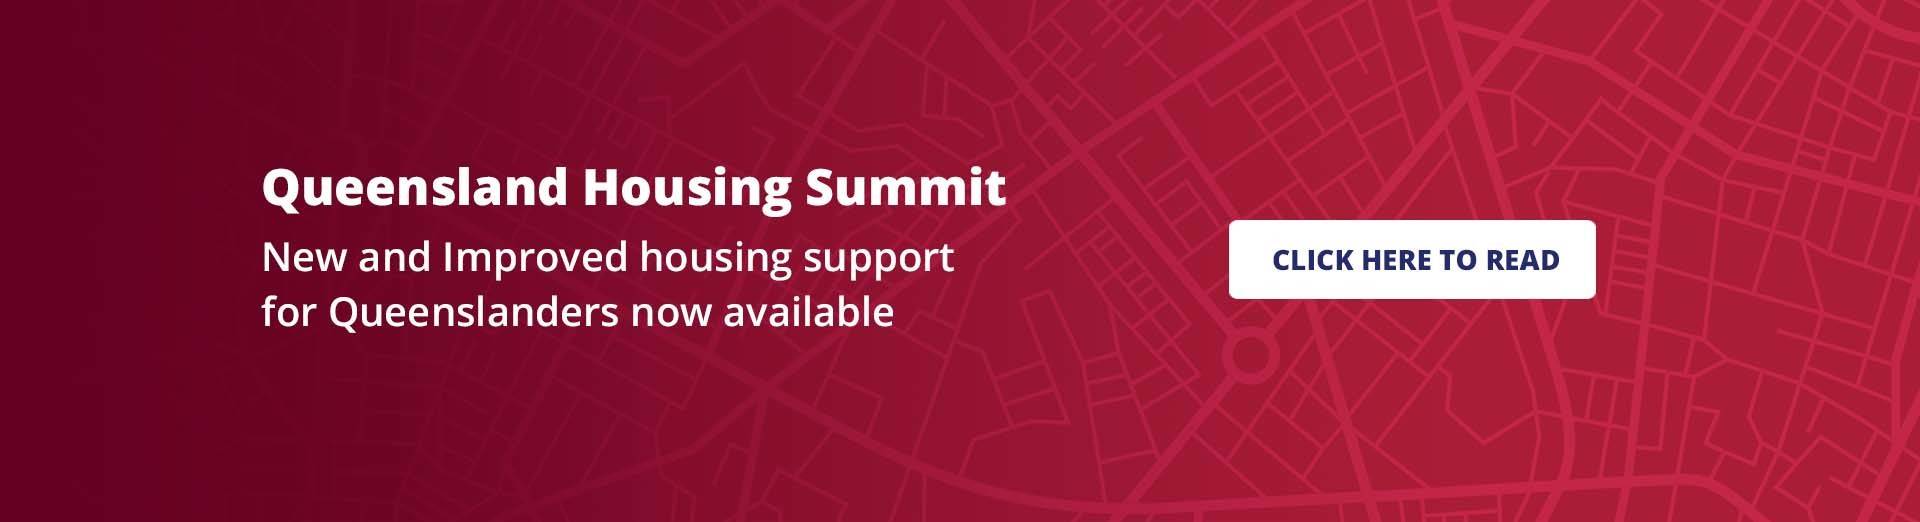 Red background. Text reads 'Queensland Housing Summit - New and Improved housing support for Queenslanders now available . click here to read